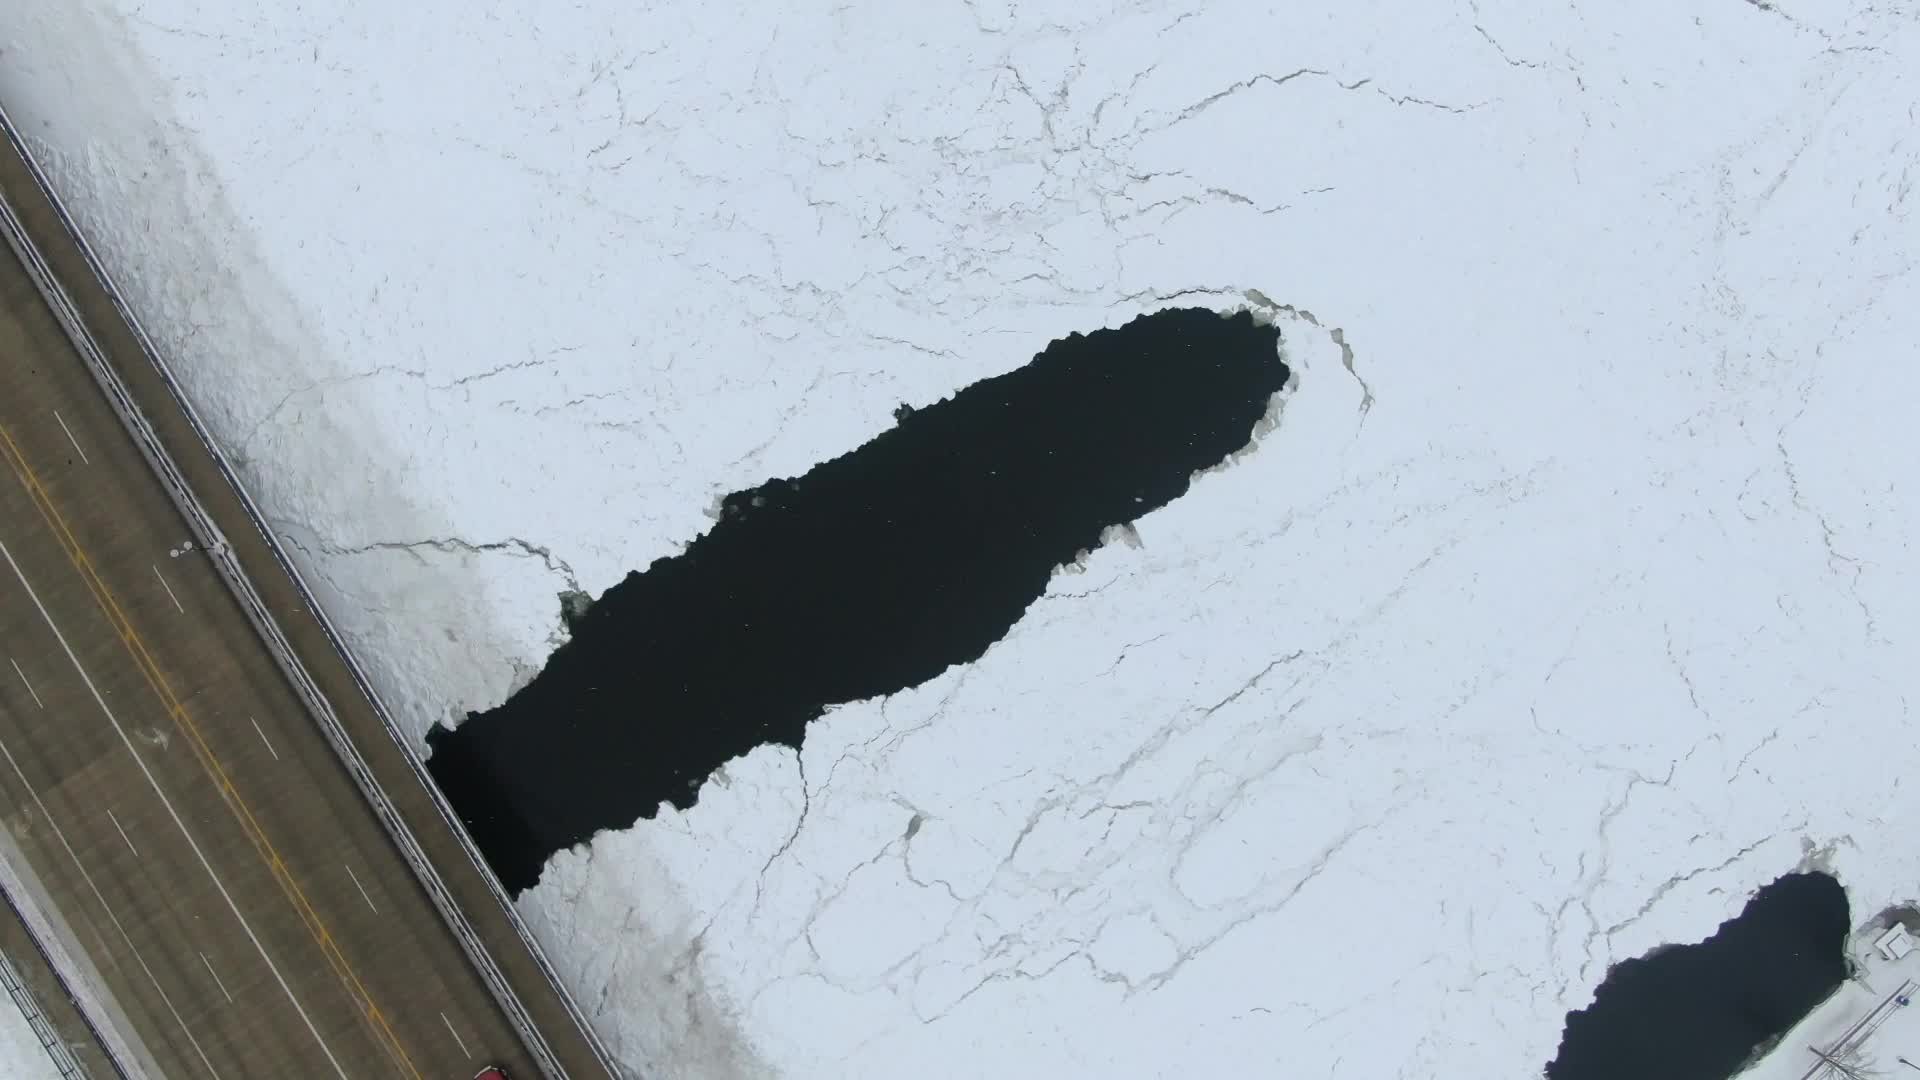 Fly over an ice jam in Dixon